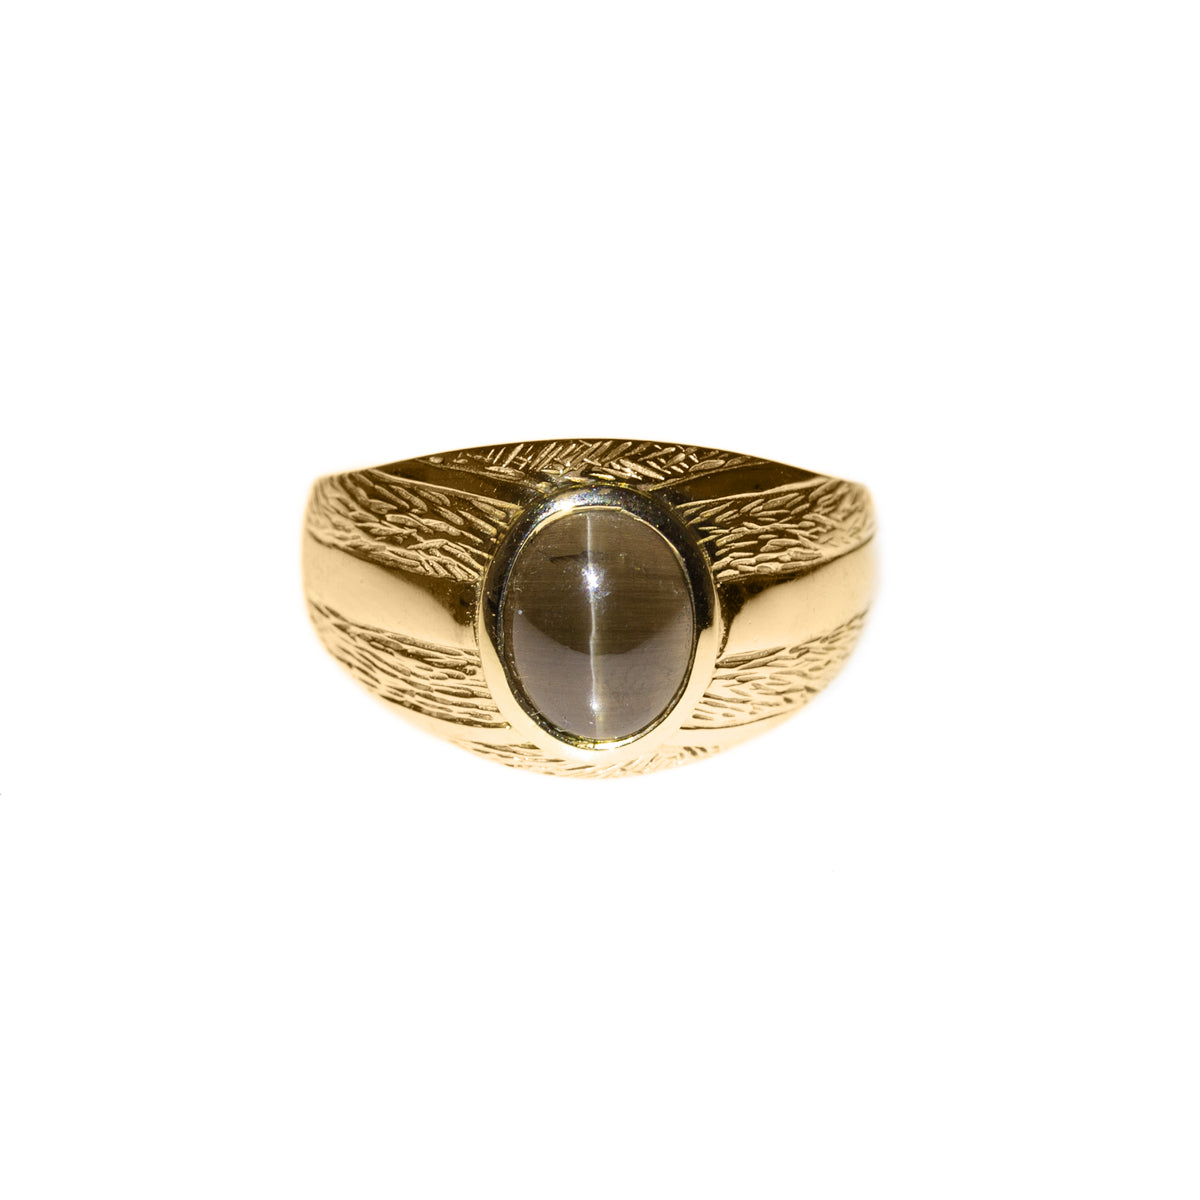 Unisex 9ct Gold Ring With Cats Eye Sillimanite Cabochon Signet Design B'ham 2005 UK Size S (Code A999)